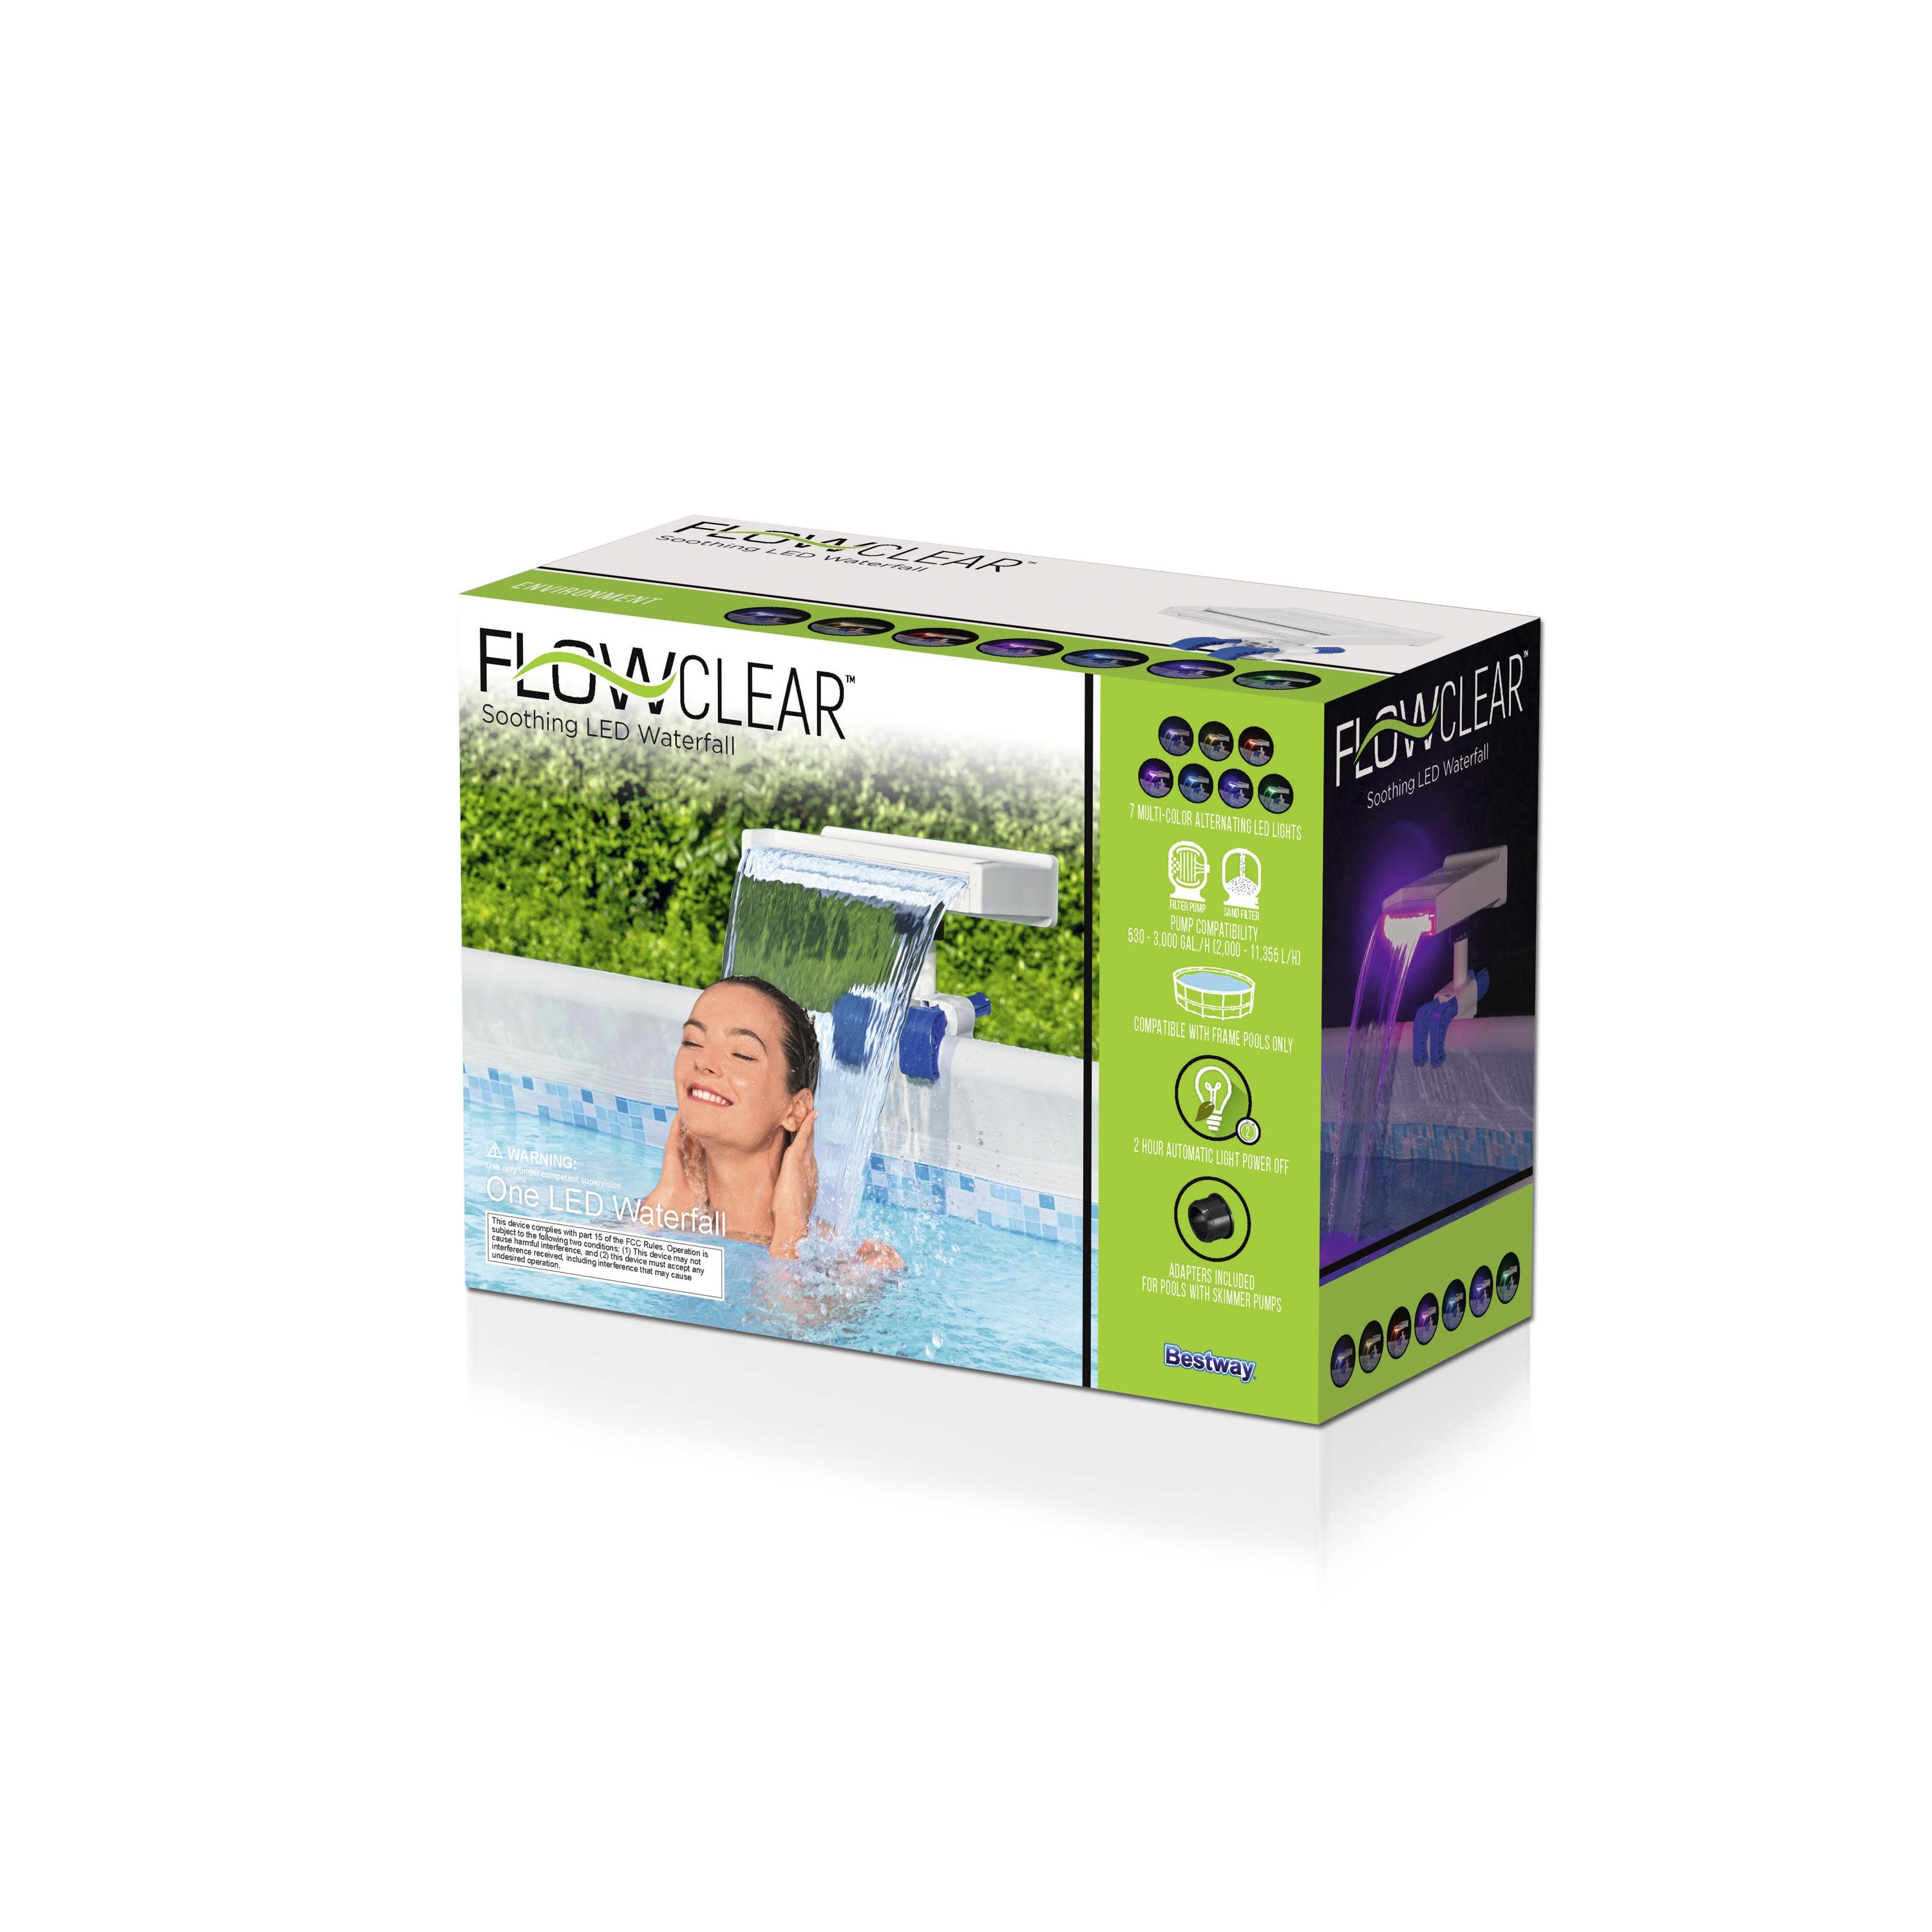 Flowclear Soothing LED Waterfall Above Ground Pool Accessory - image 9 of 9